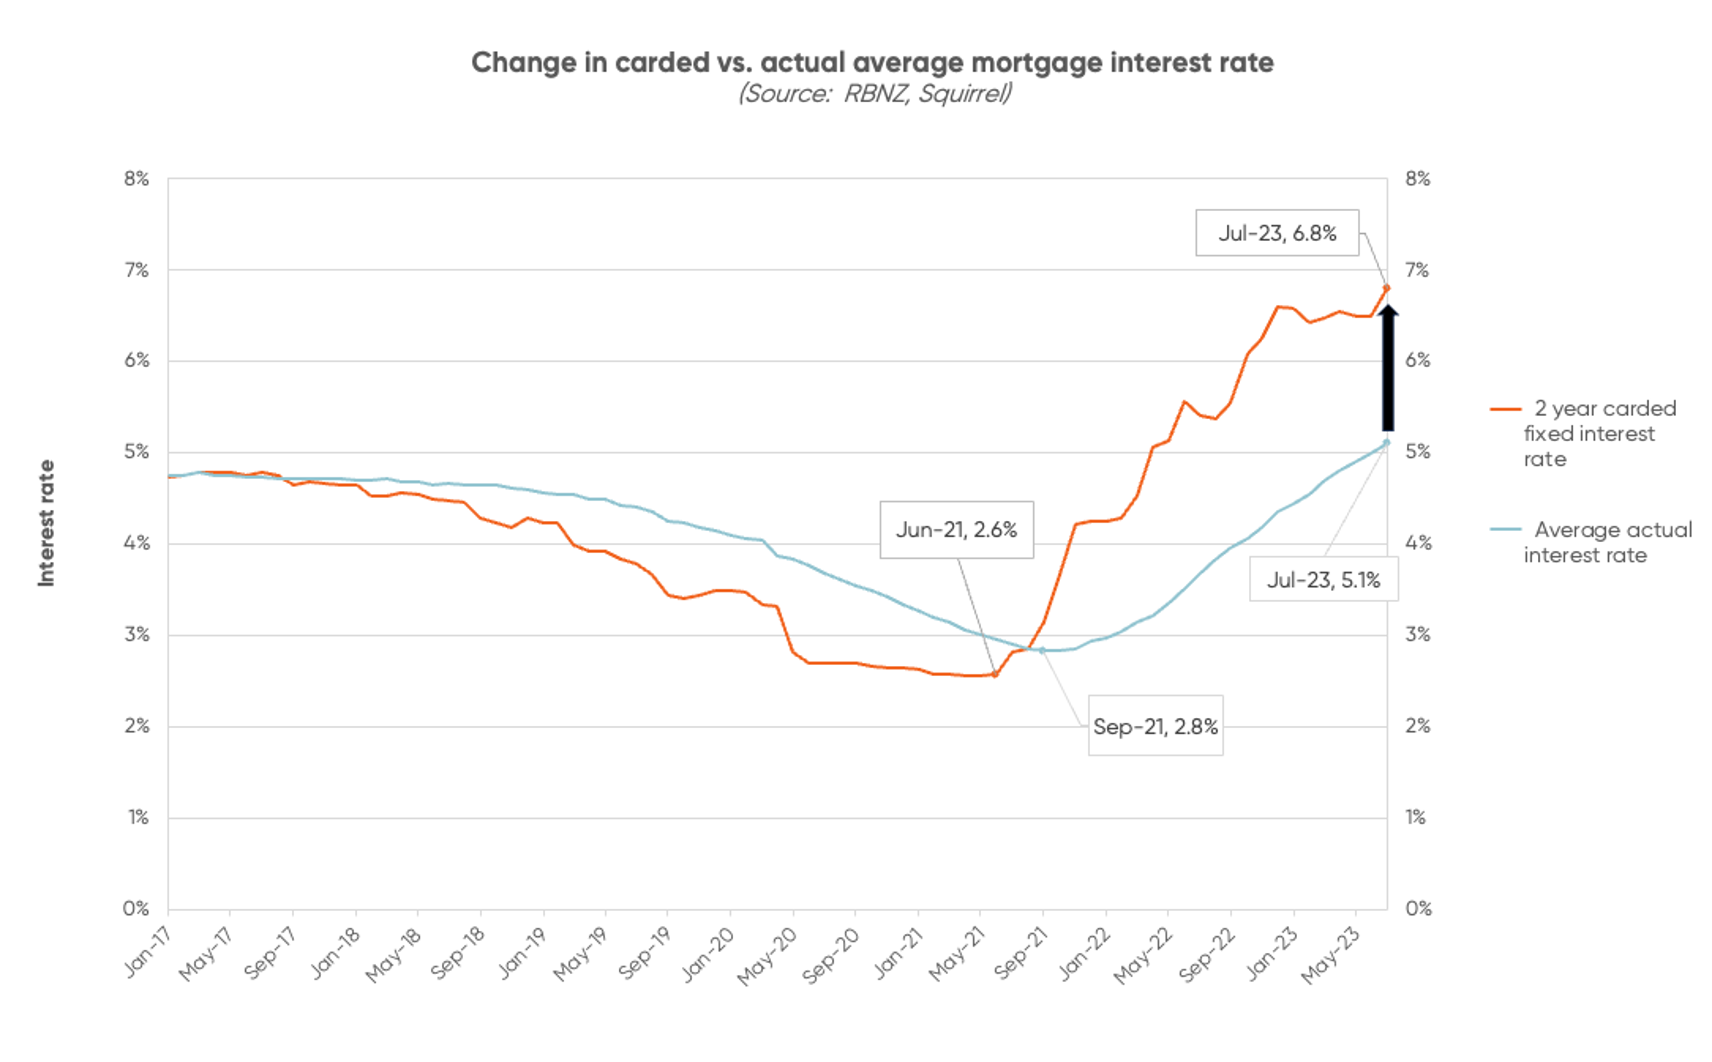 Graph tracking change in carded vs. actual interest rates over time in NZ